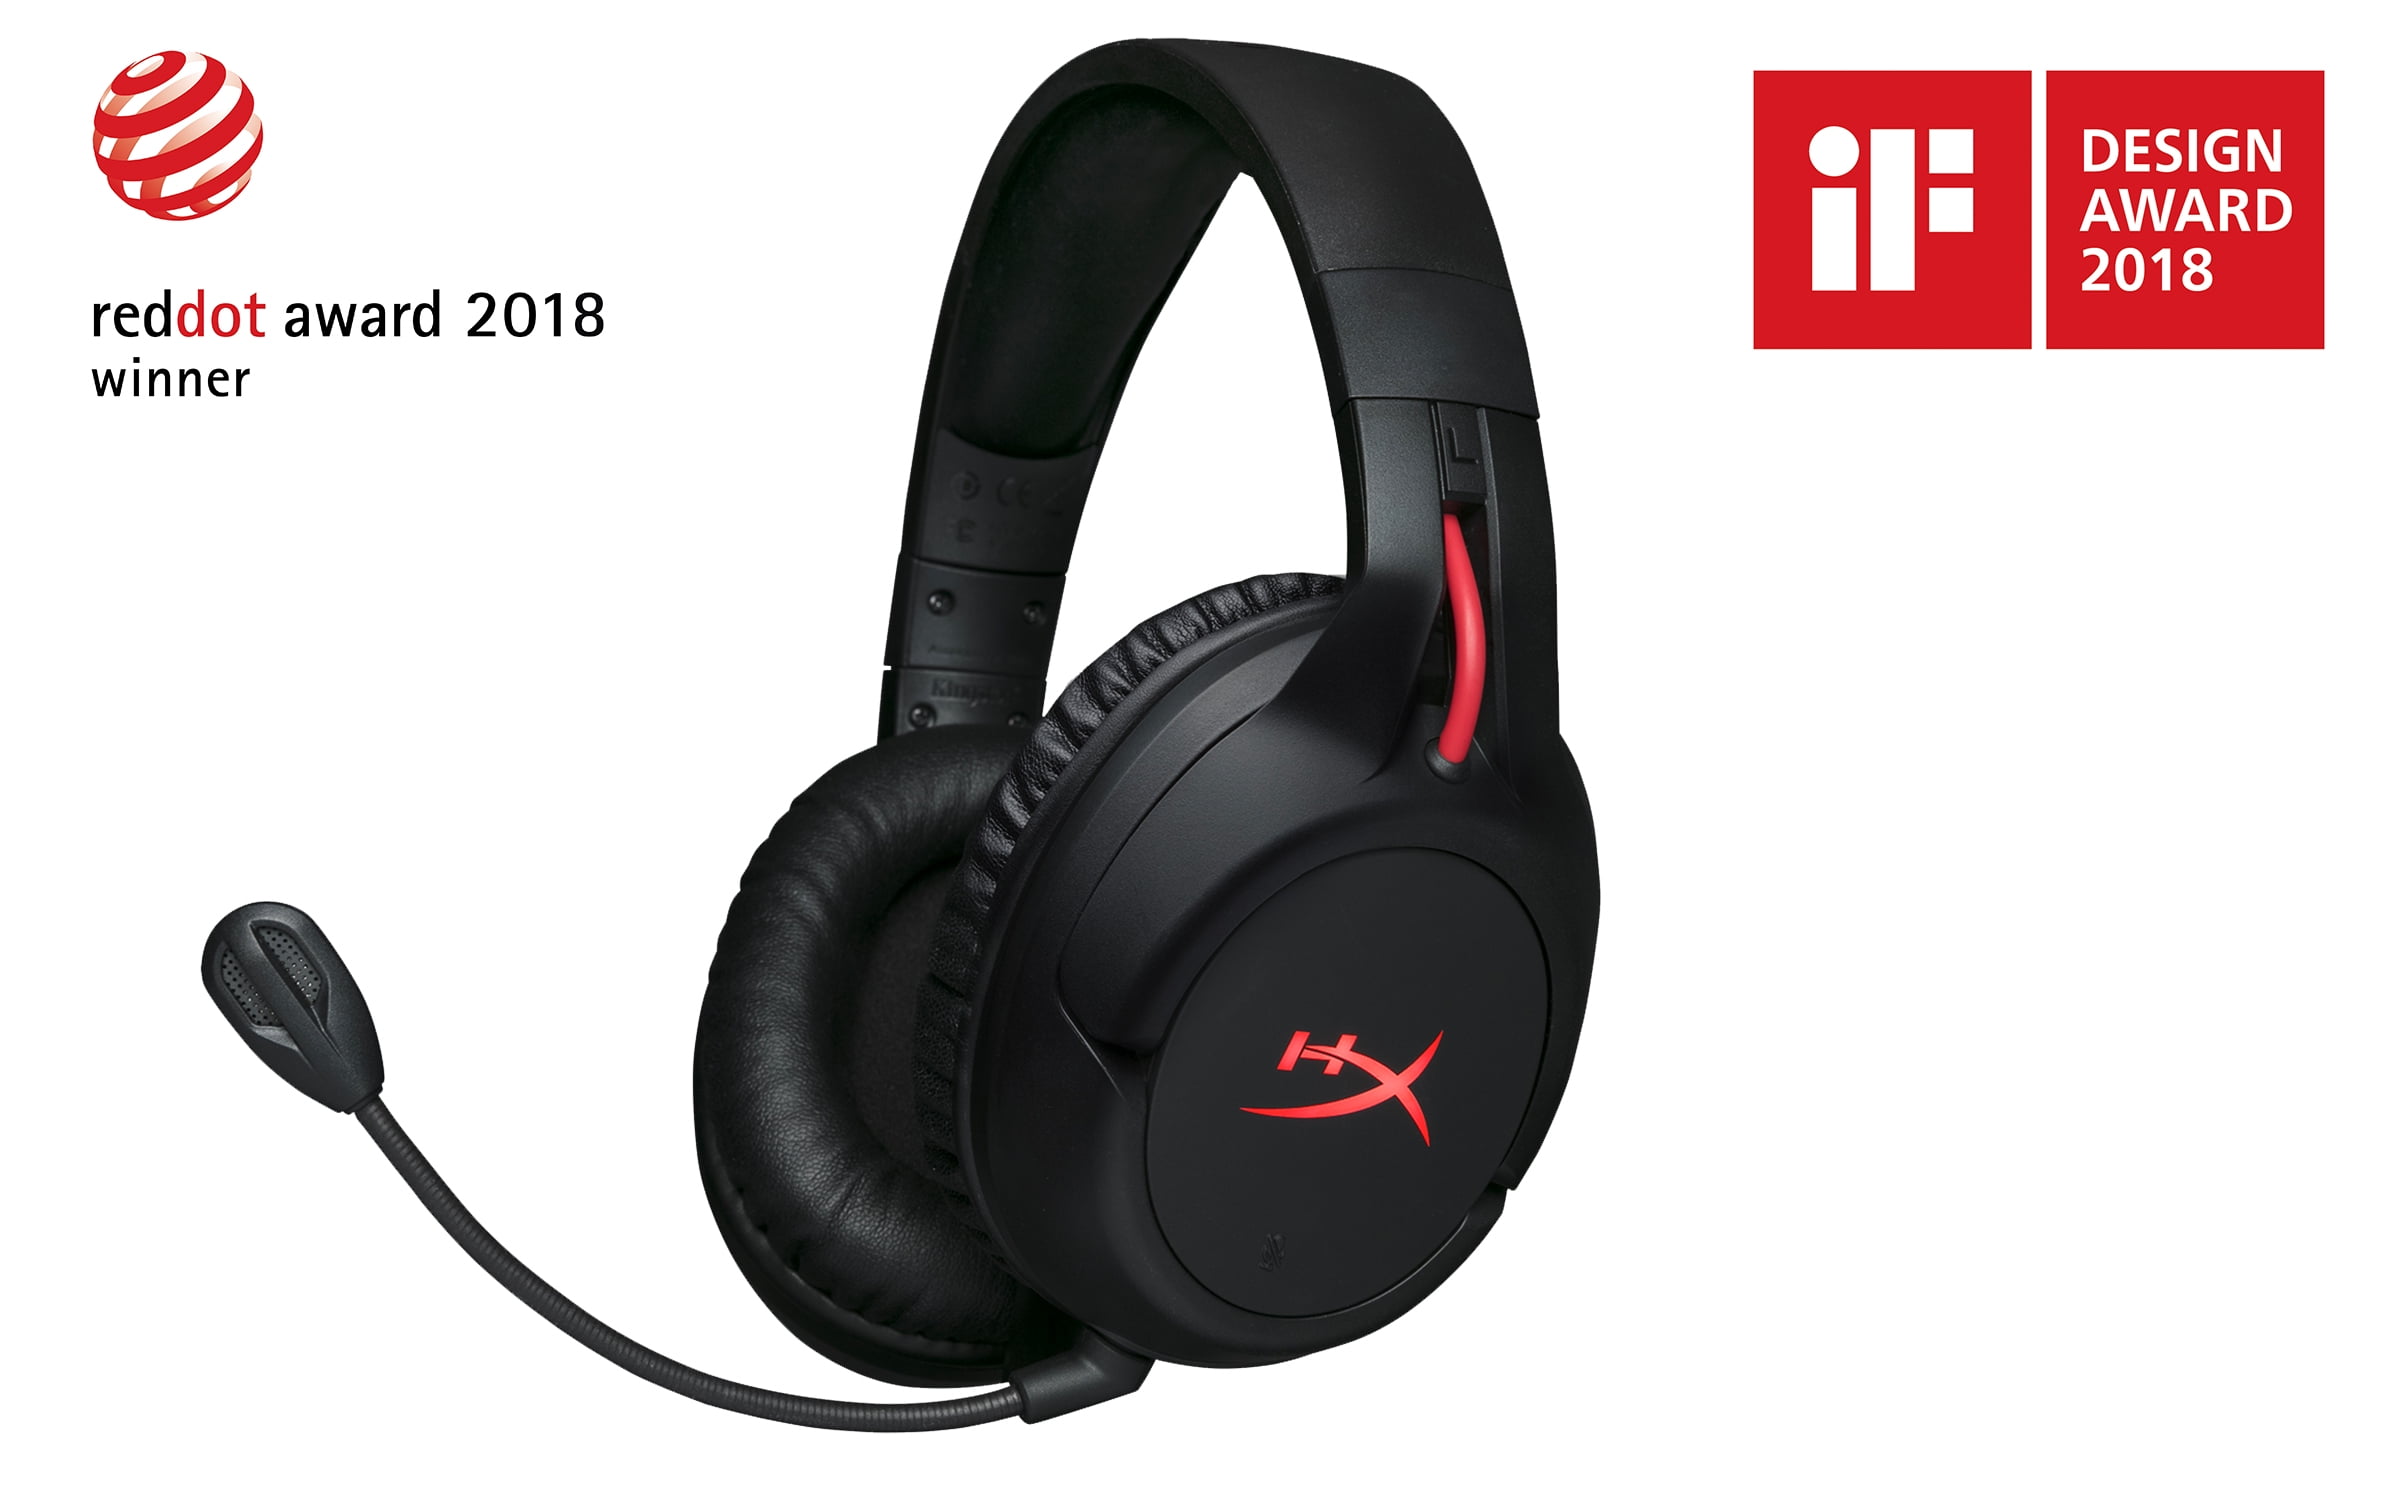 Hyperx Cloud Flight Wireless Gaming Headset 30 Hour Battery Life Immersive In Game Audio Intuitive Audio And Mic Controls Led Lighting Effects - event how to get the spider headphones roblox 2018